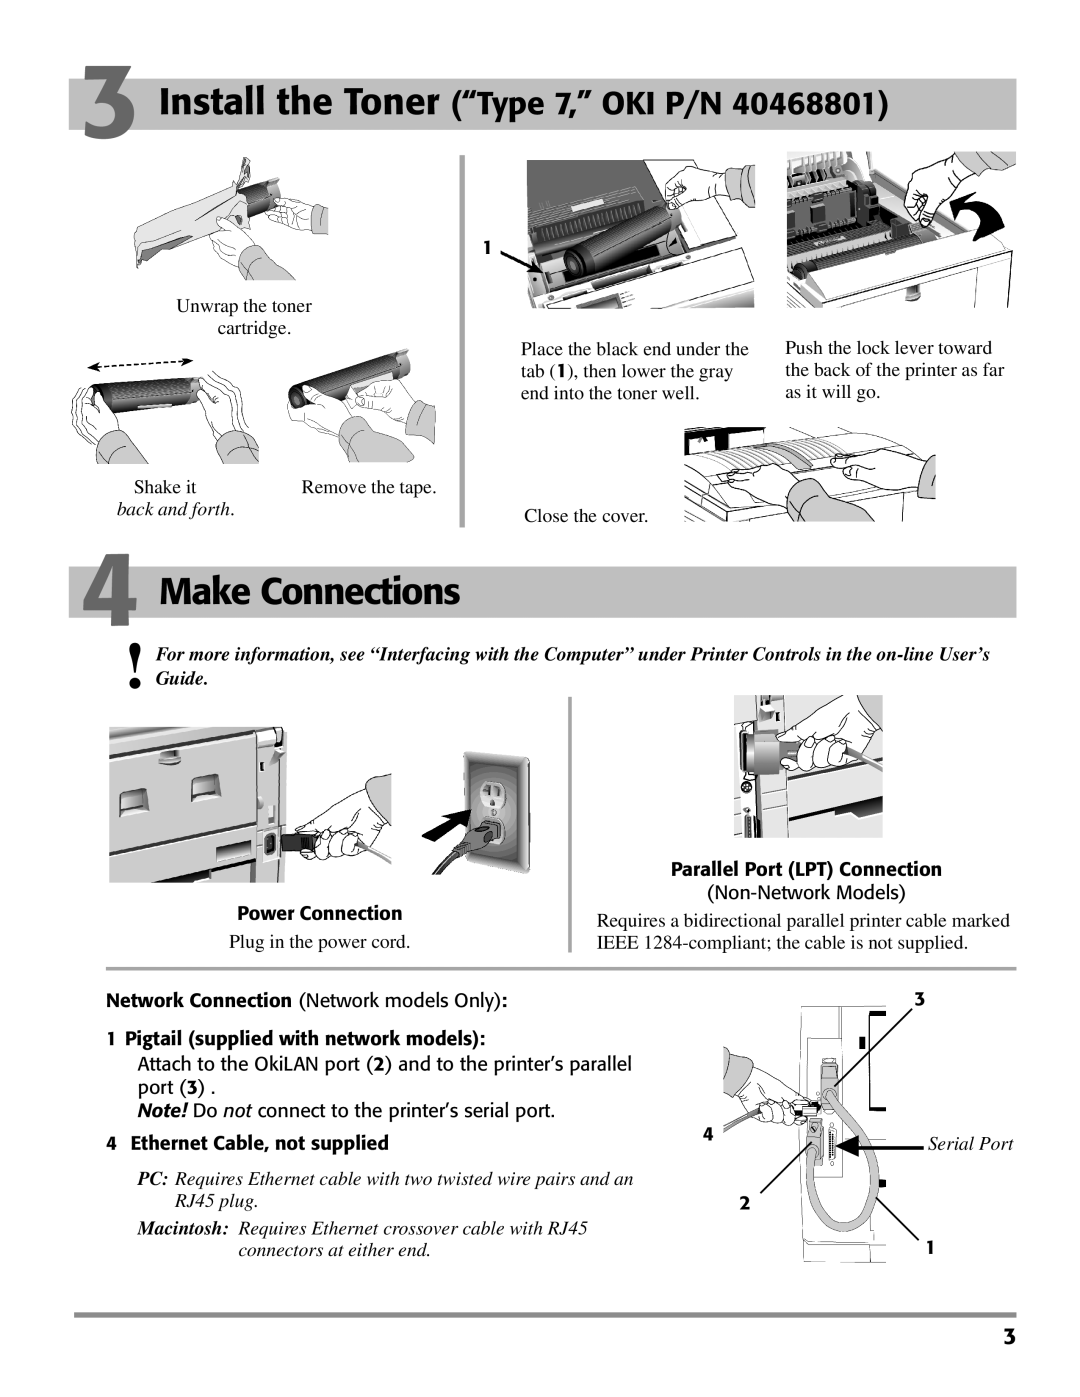 Oki PAGE 24 quick start Make Connections, Back and forth, Power Connection, Parallel Port LPT Connection Non-Network Models 